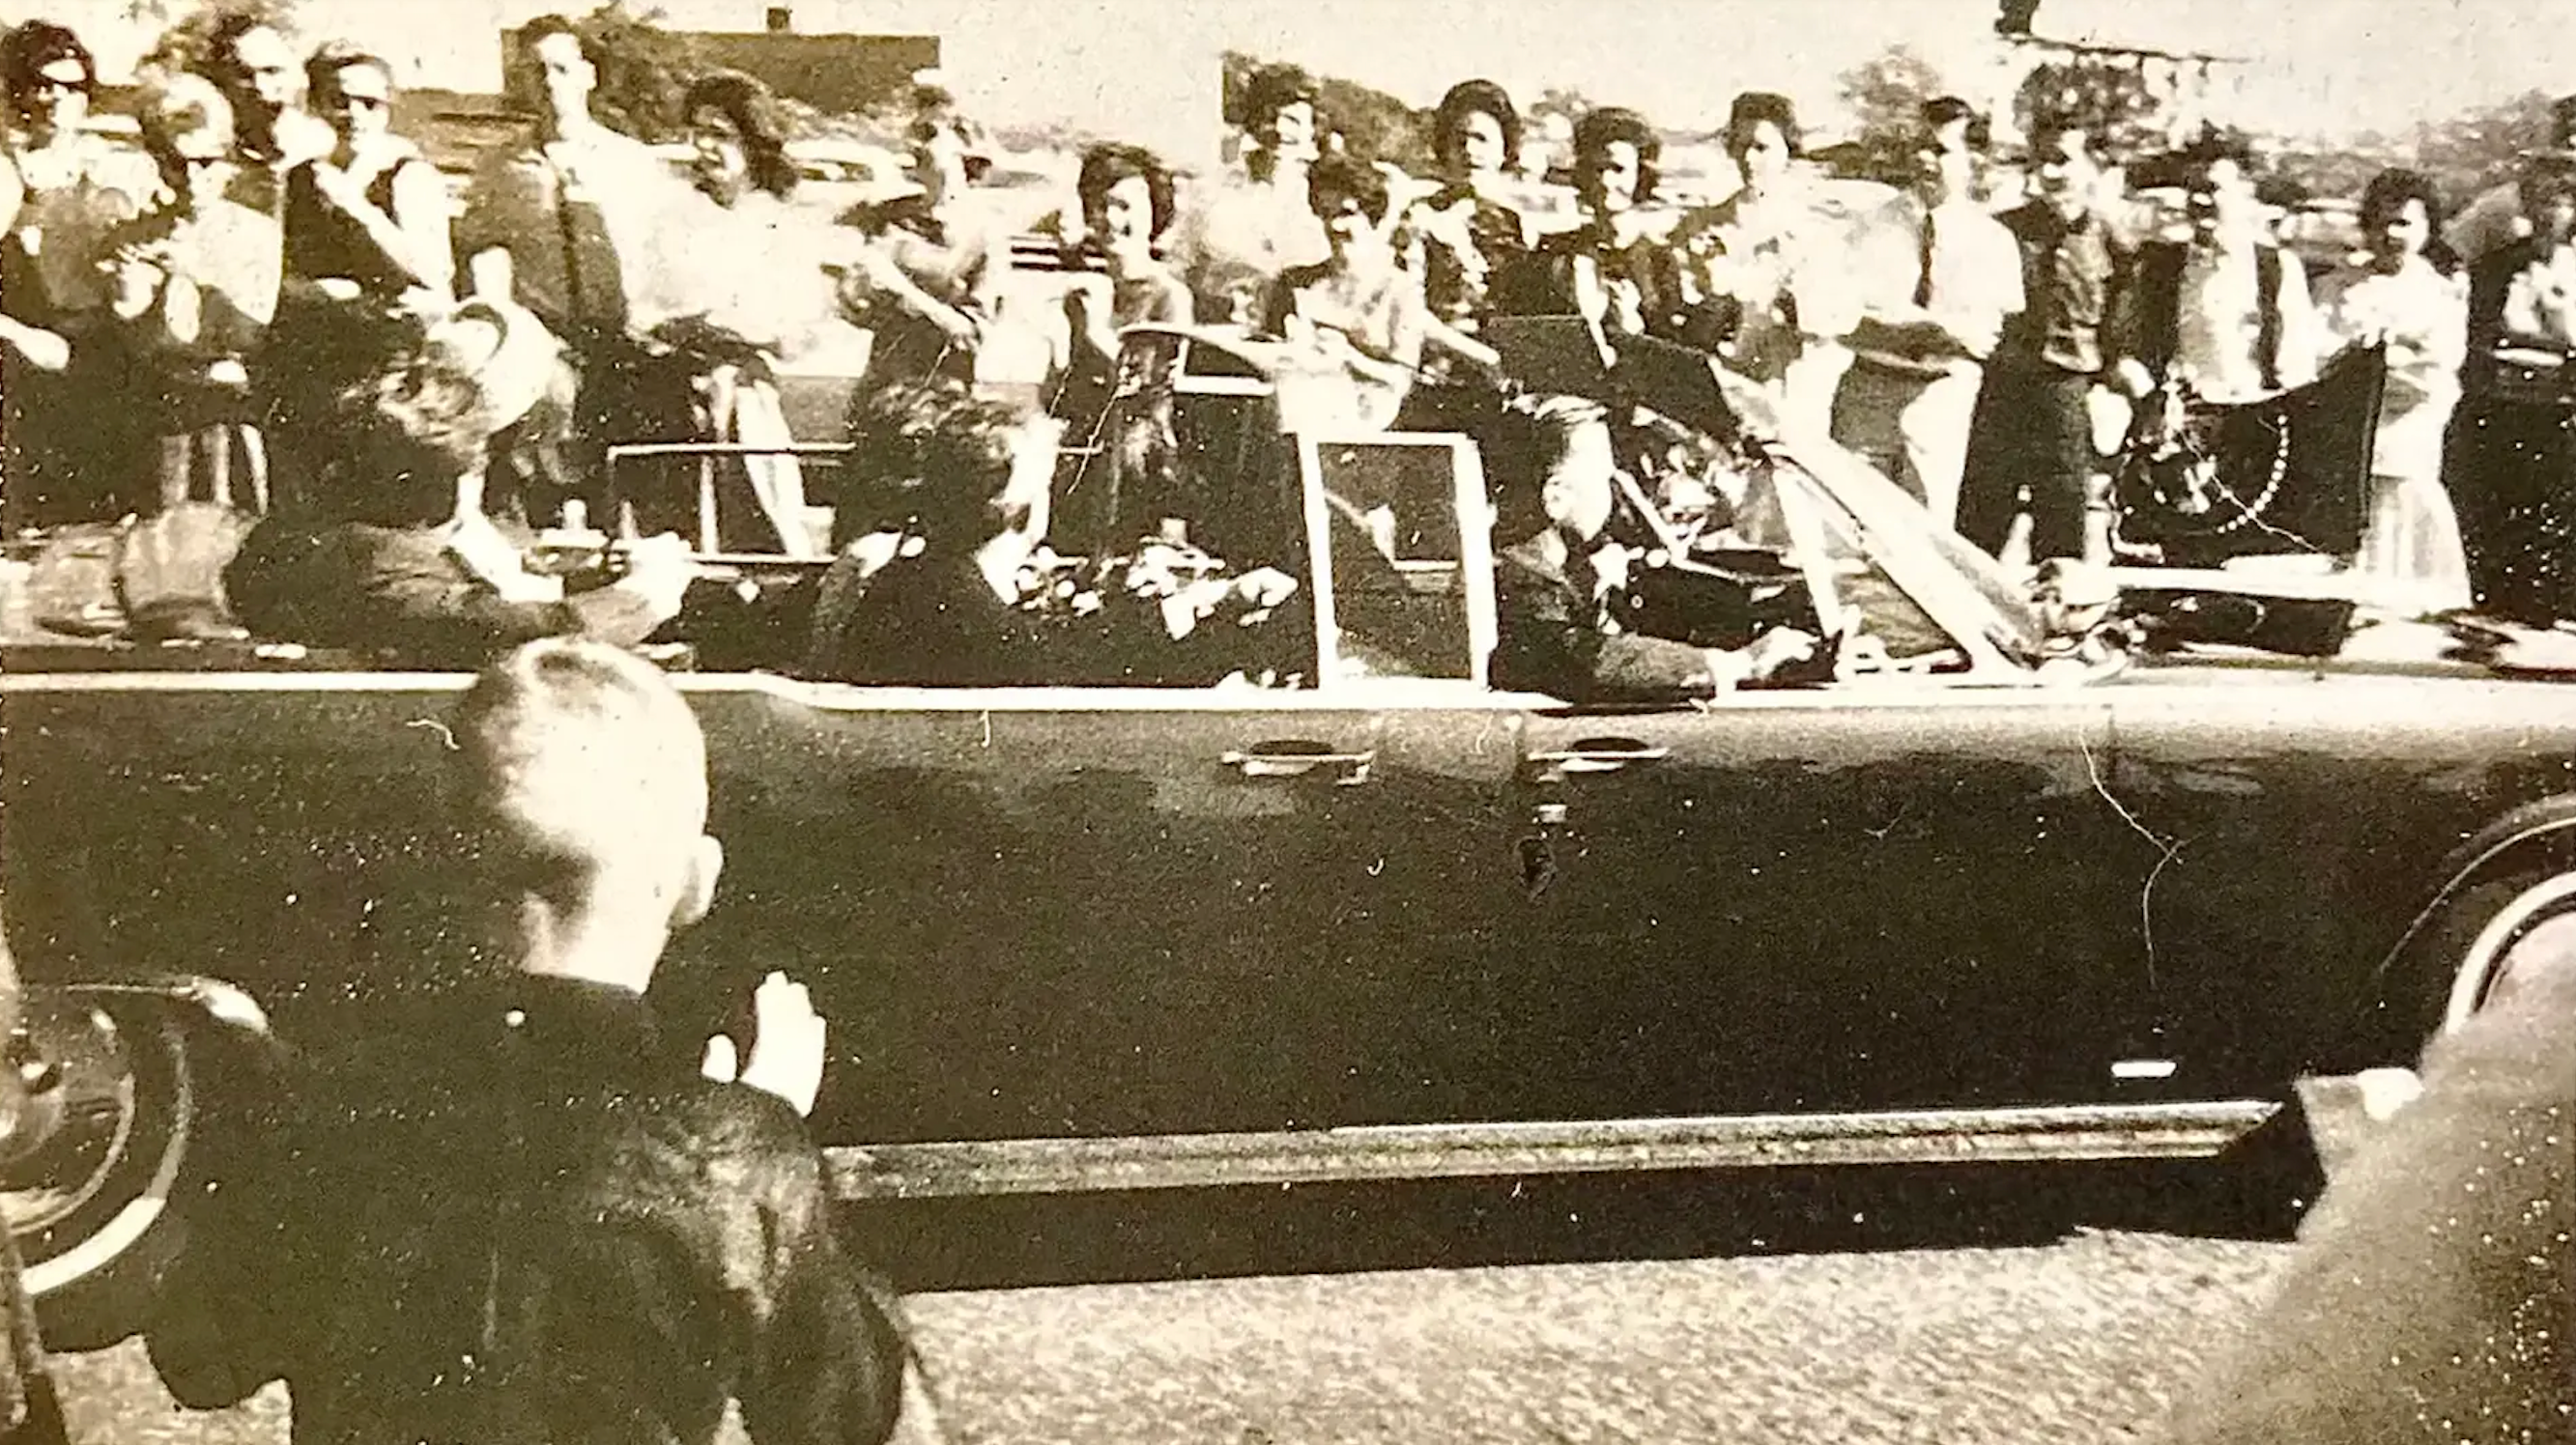 A photo taken on the day of John F Kennedy’s assassination in Dallas in 1963 has been unearthed in a Texas thrift store